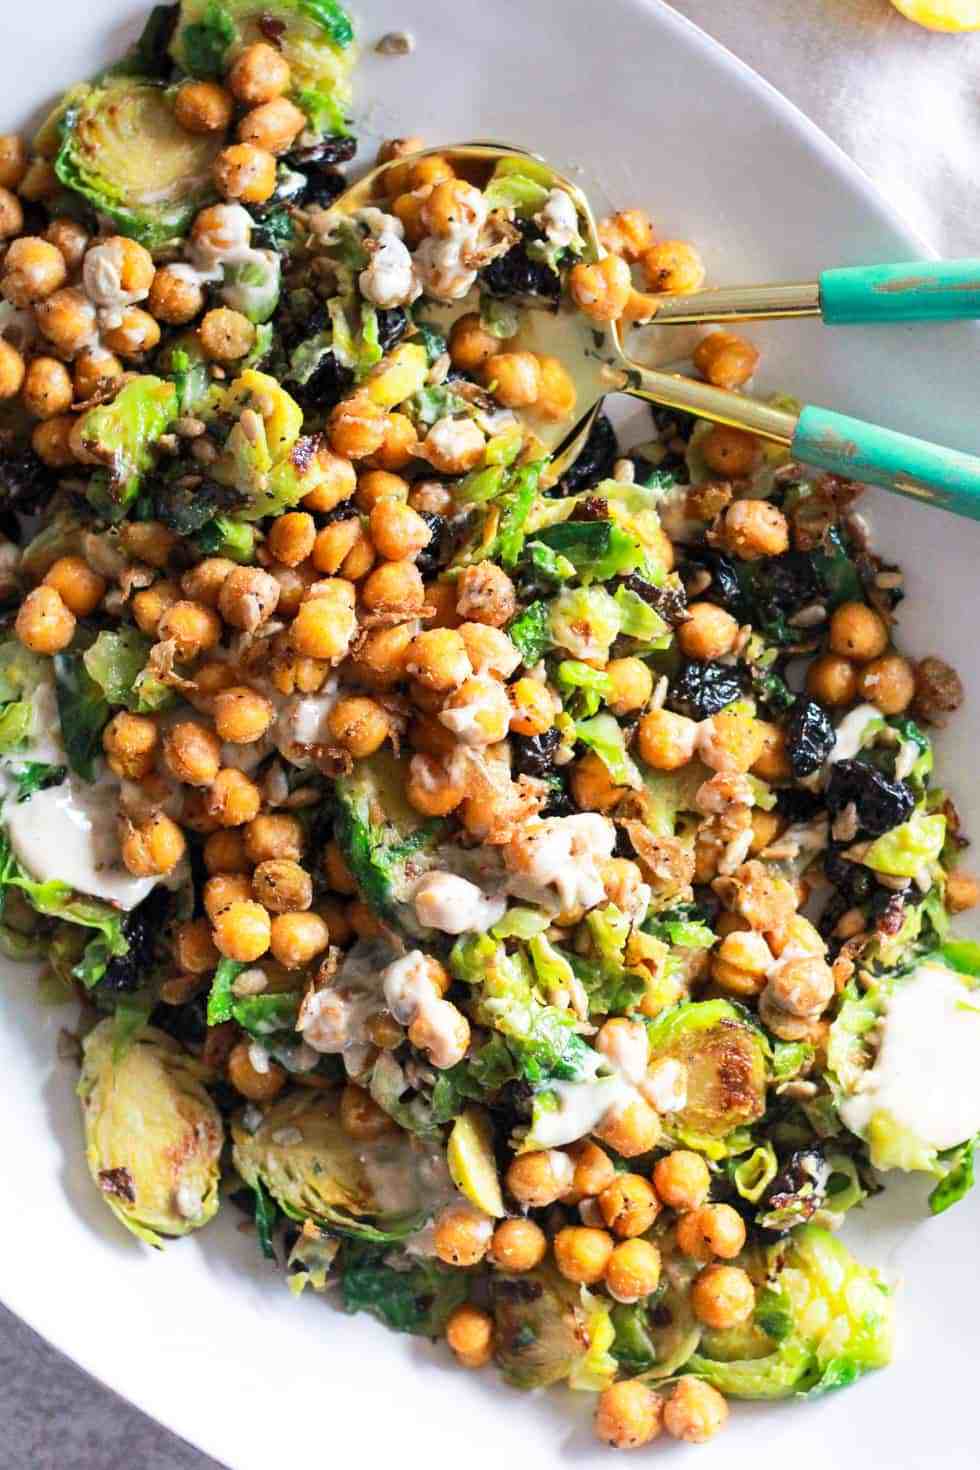 Chickpea salad with brussels sprouts on a white platter is an easy college meal